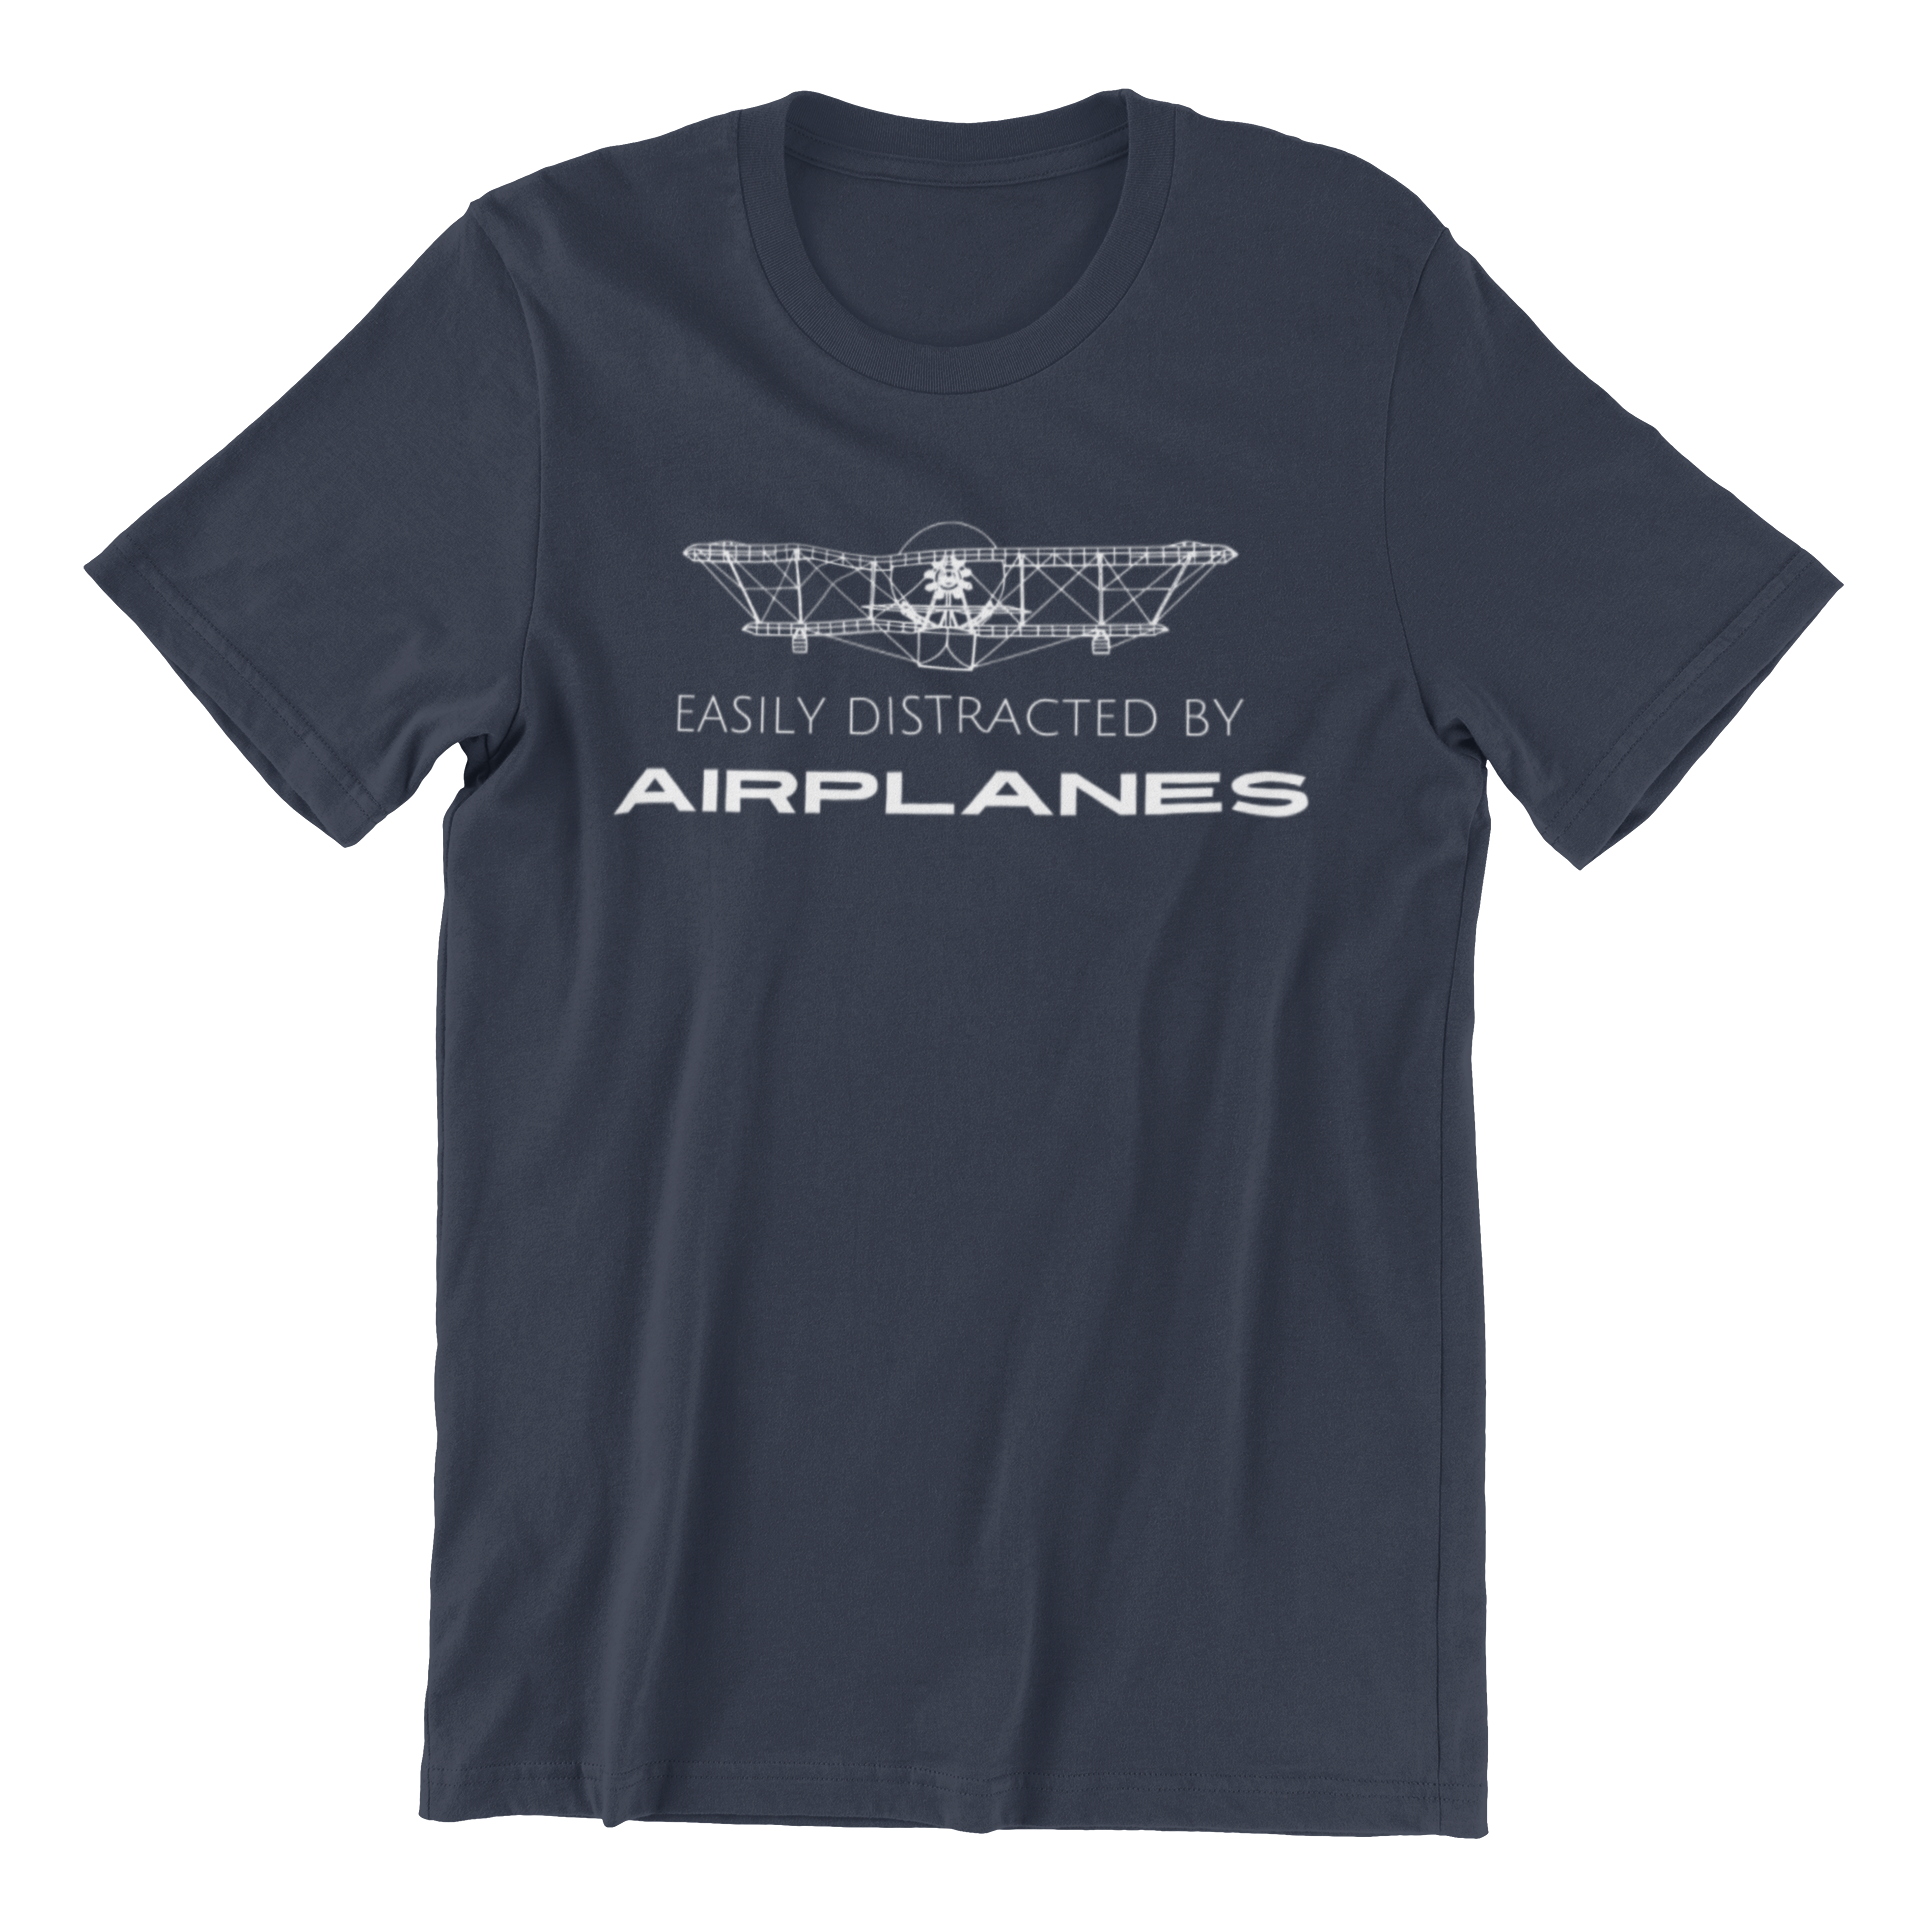 navy aviation shirt that says easily distracted by airplanes